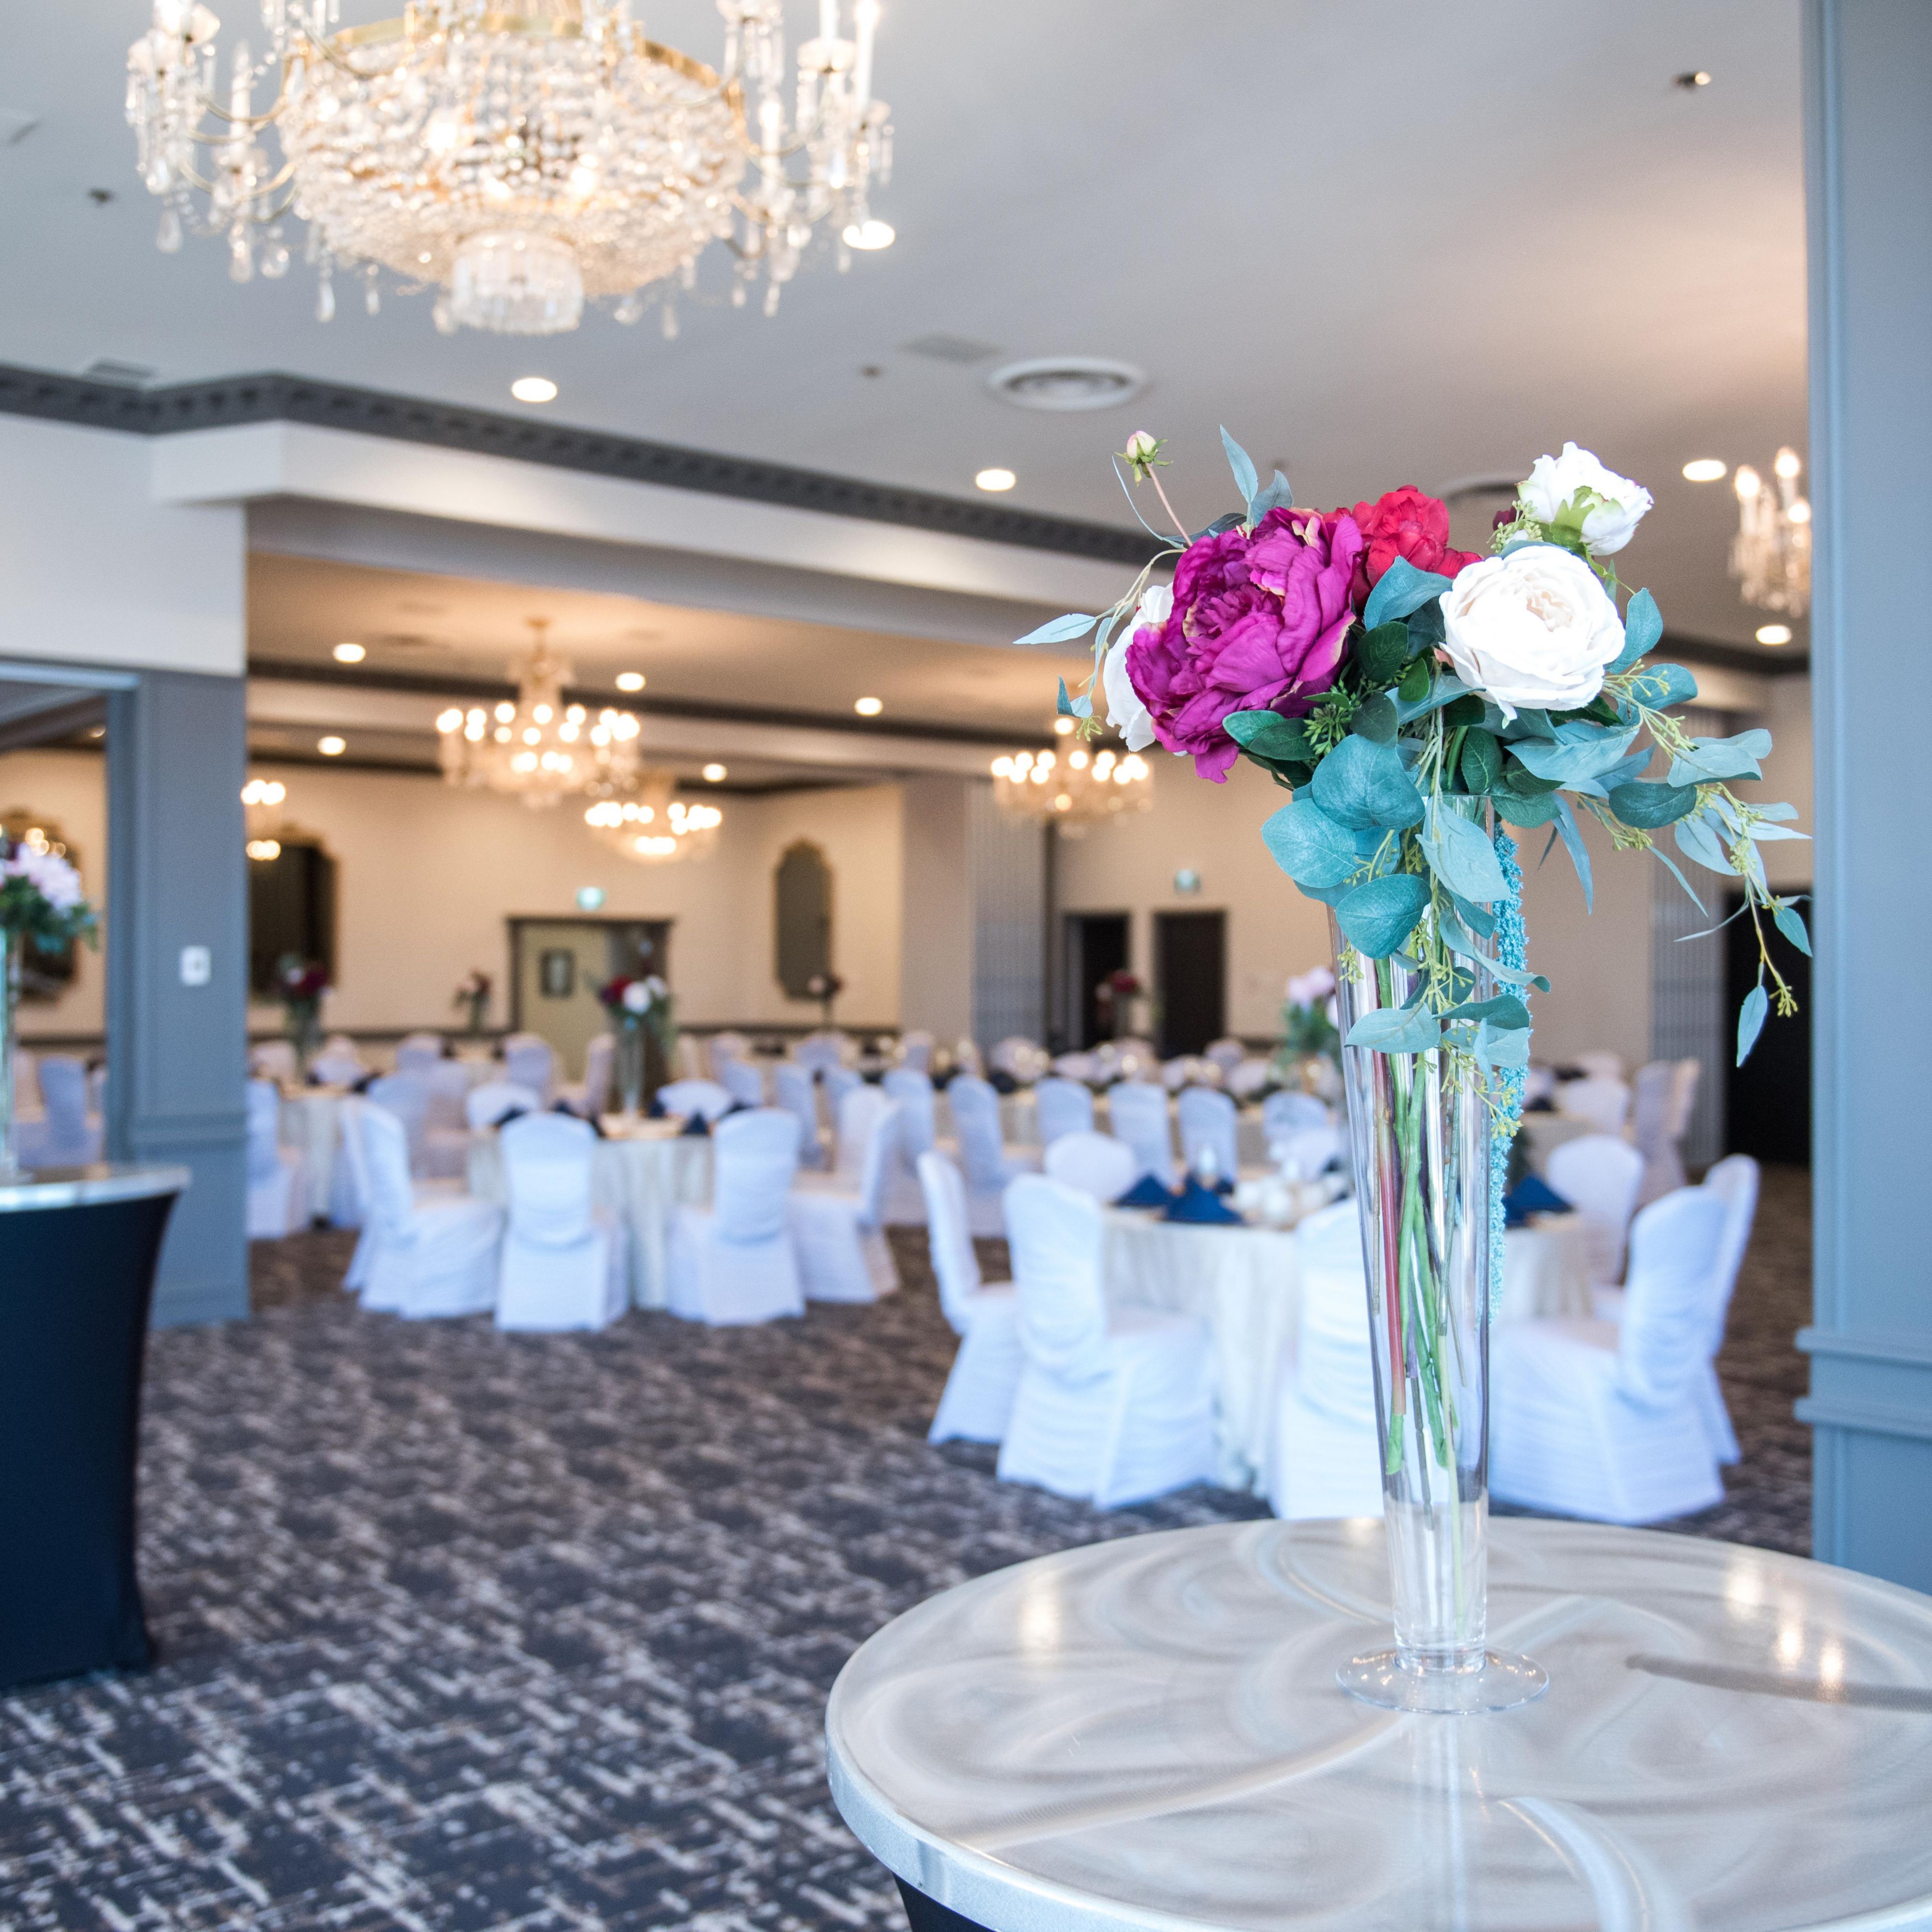 Our Ballroom is the perfect venue for any event